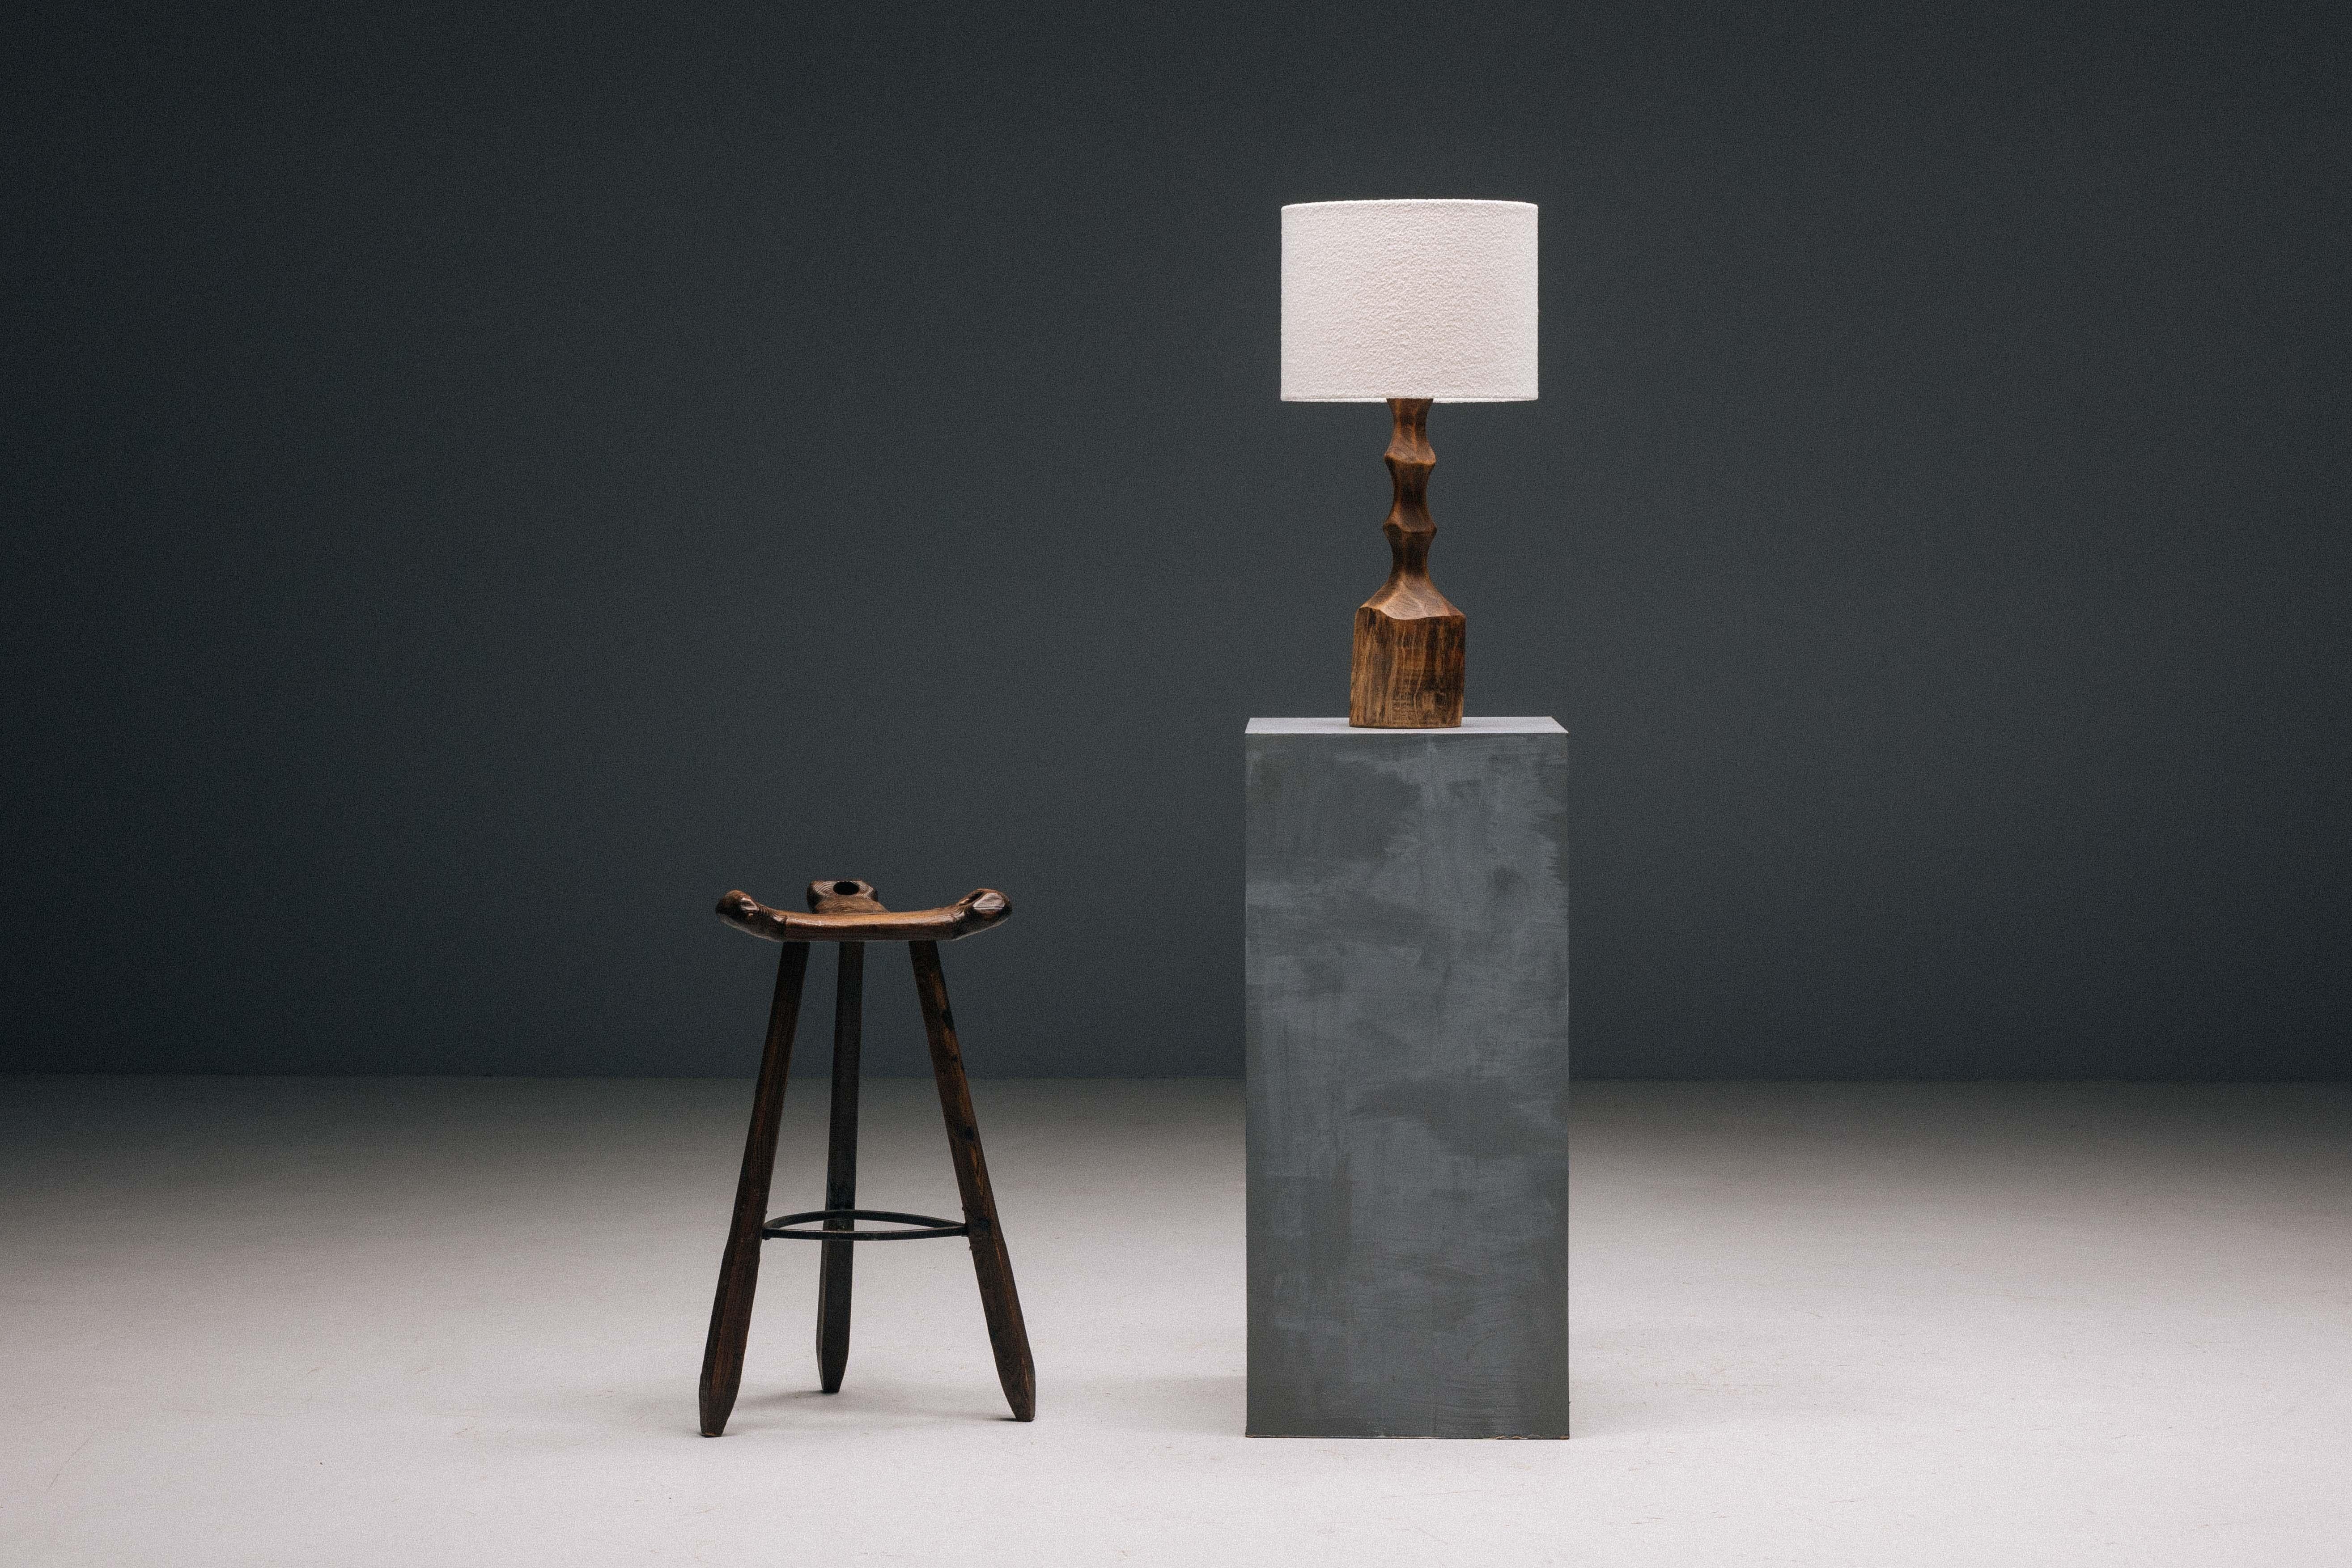 Brutalist solid wood table lamp from the 1970s, embodying the essence of brutalist design with its raw, unapologetic aesthetic. Hand-carved from a single block of wood, this lamp is a unique work of art, showcasing the skill and creativity of its